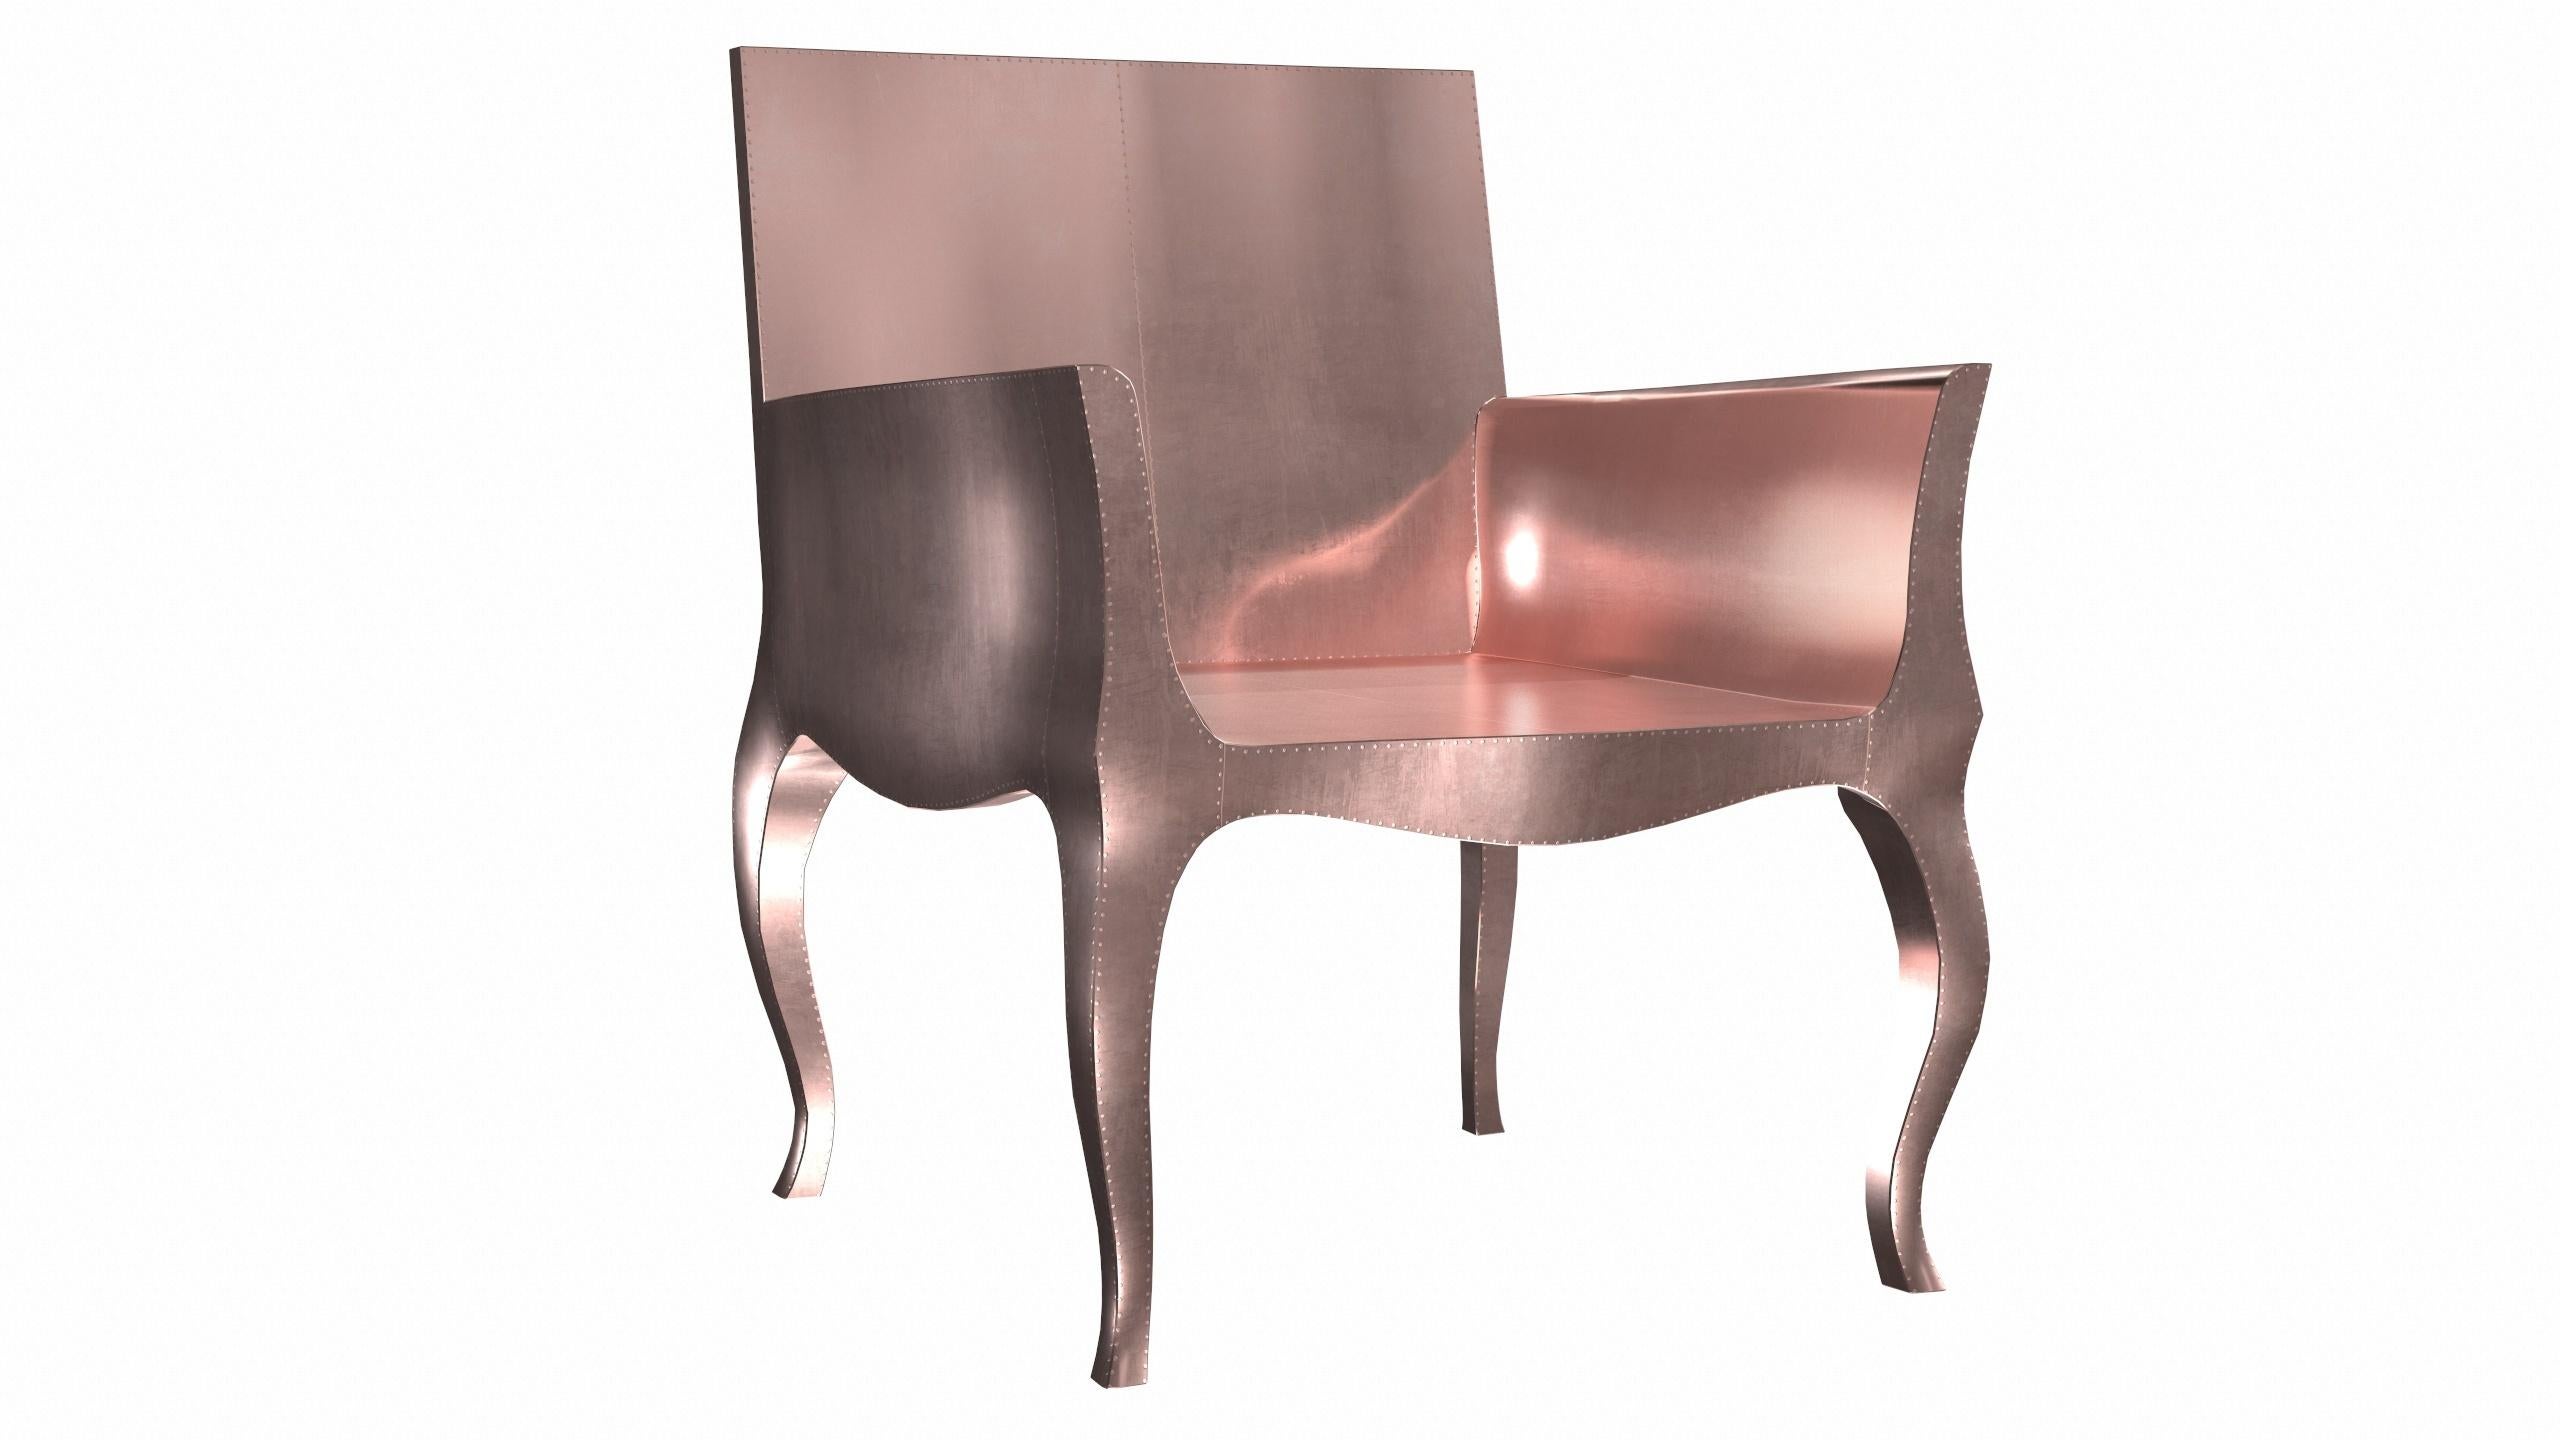 Art Deco Club Chairs in Smooth Copper by Paul Mathieu for S. Odegard In New Condition For Sale In New York, NY